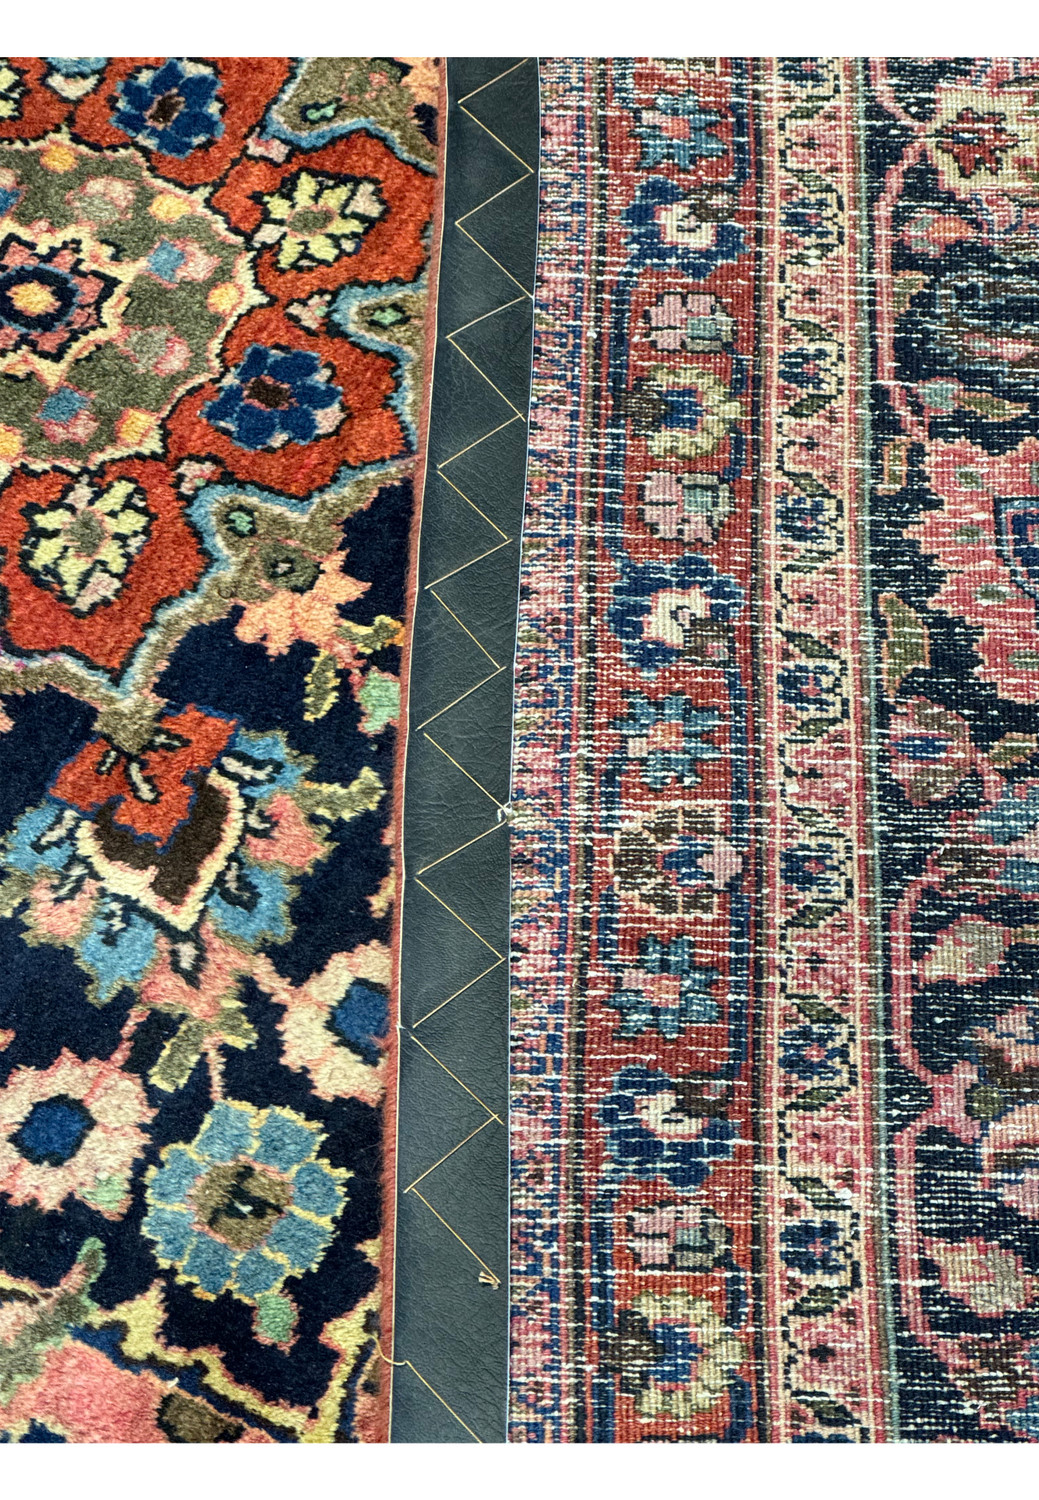 An angled view of a Persian Mashad rug lying against a grey floor, highlighting the contrast between the rug’s elaborate edge patterns, with repeating floral motifs in red, blue, and cream, and the solid, modern floor design, emphasizing the blend of traditional craftsmanship with contemporary styling